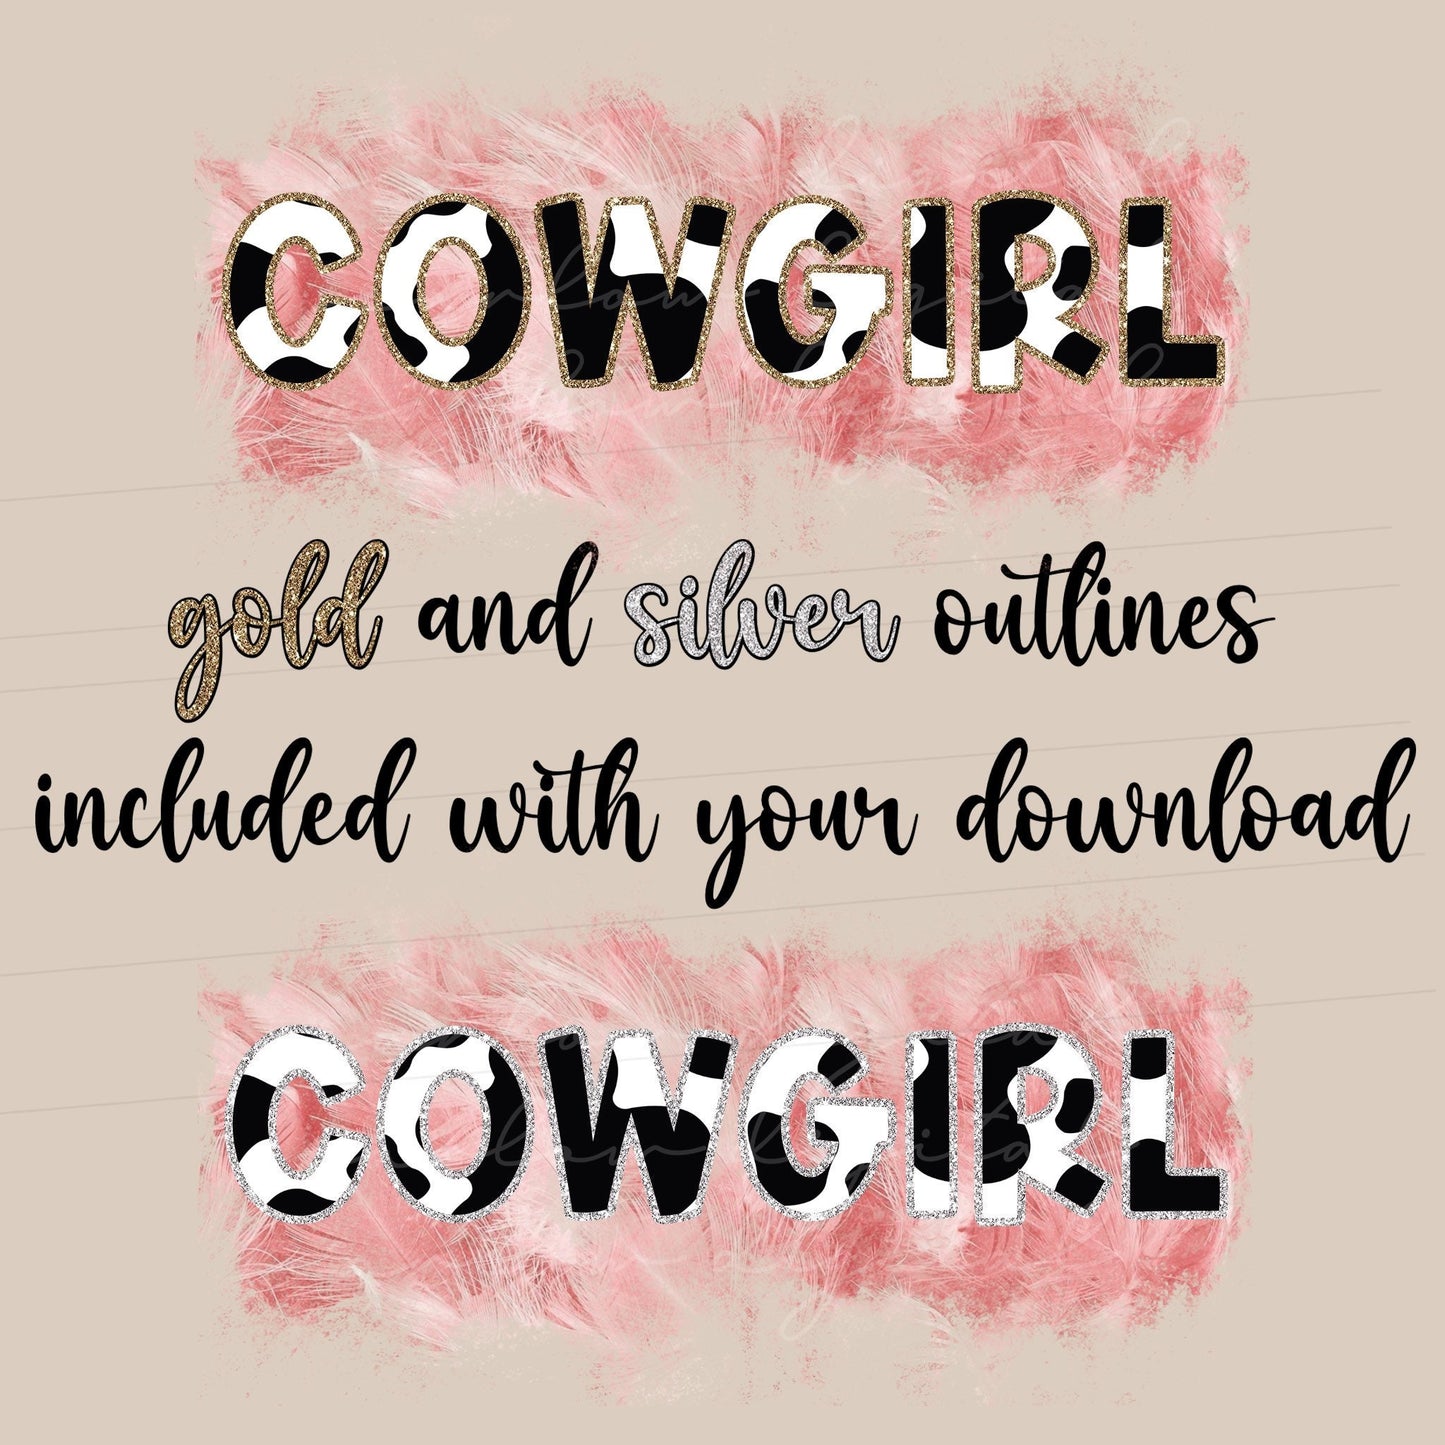 Born To Be A Cowgirl PNG sublimation design download, little girl png designs, western girl png, cowhide girl sublimation design, girl png